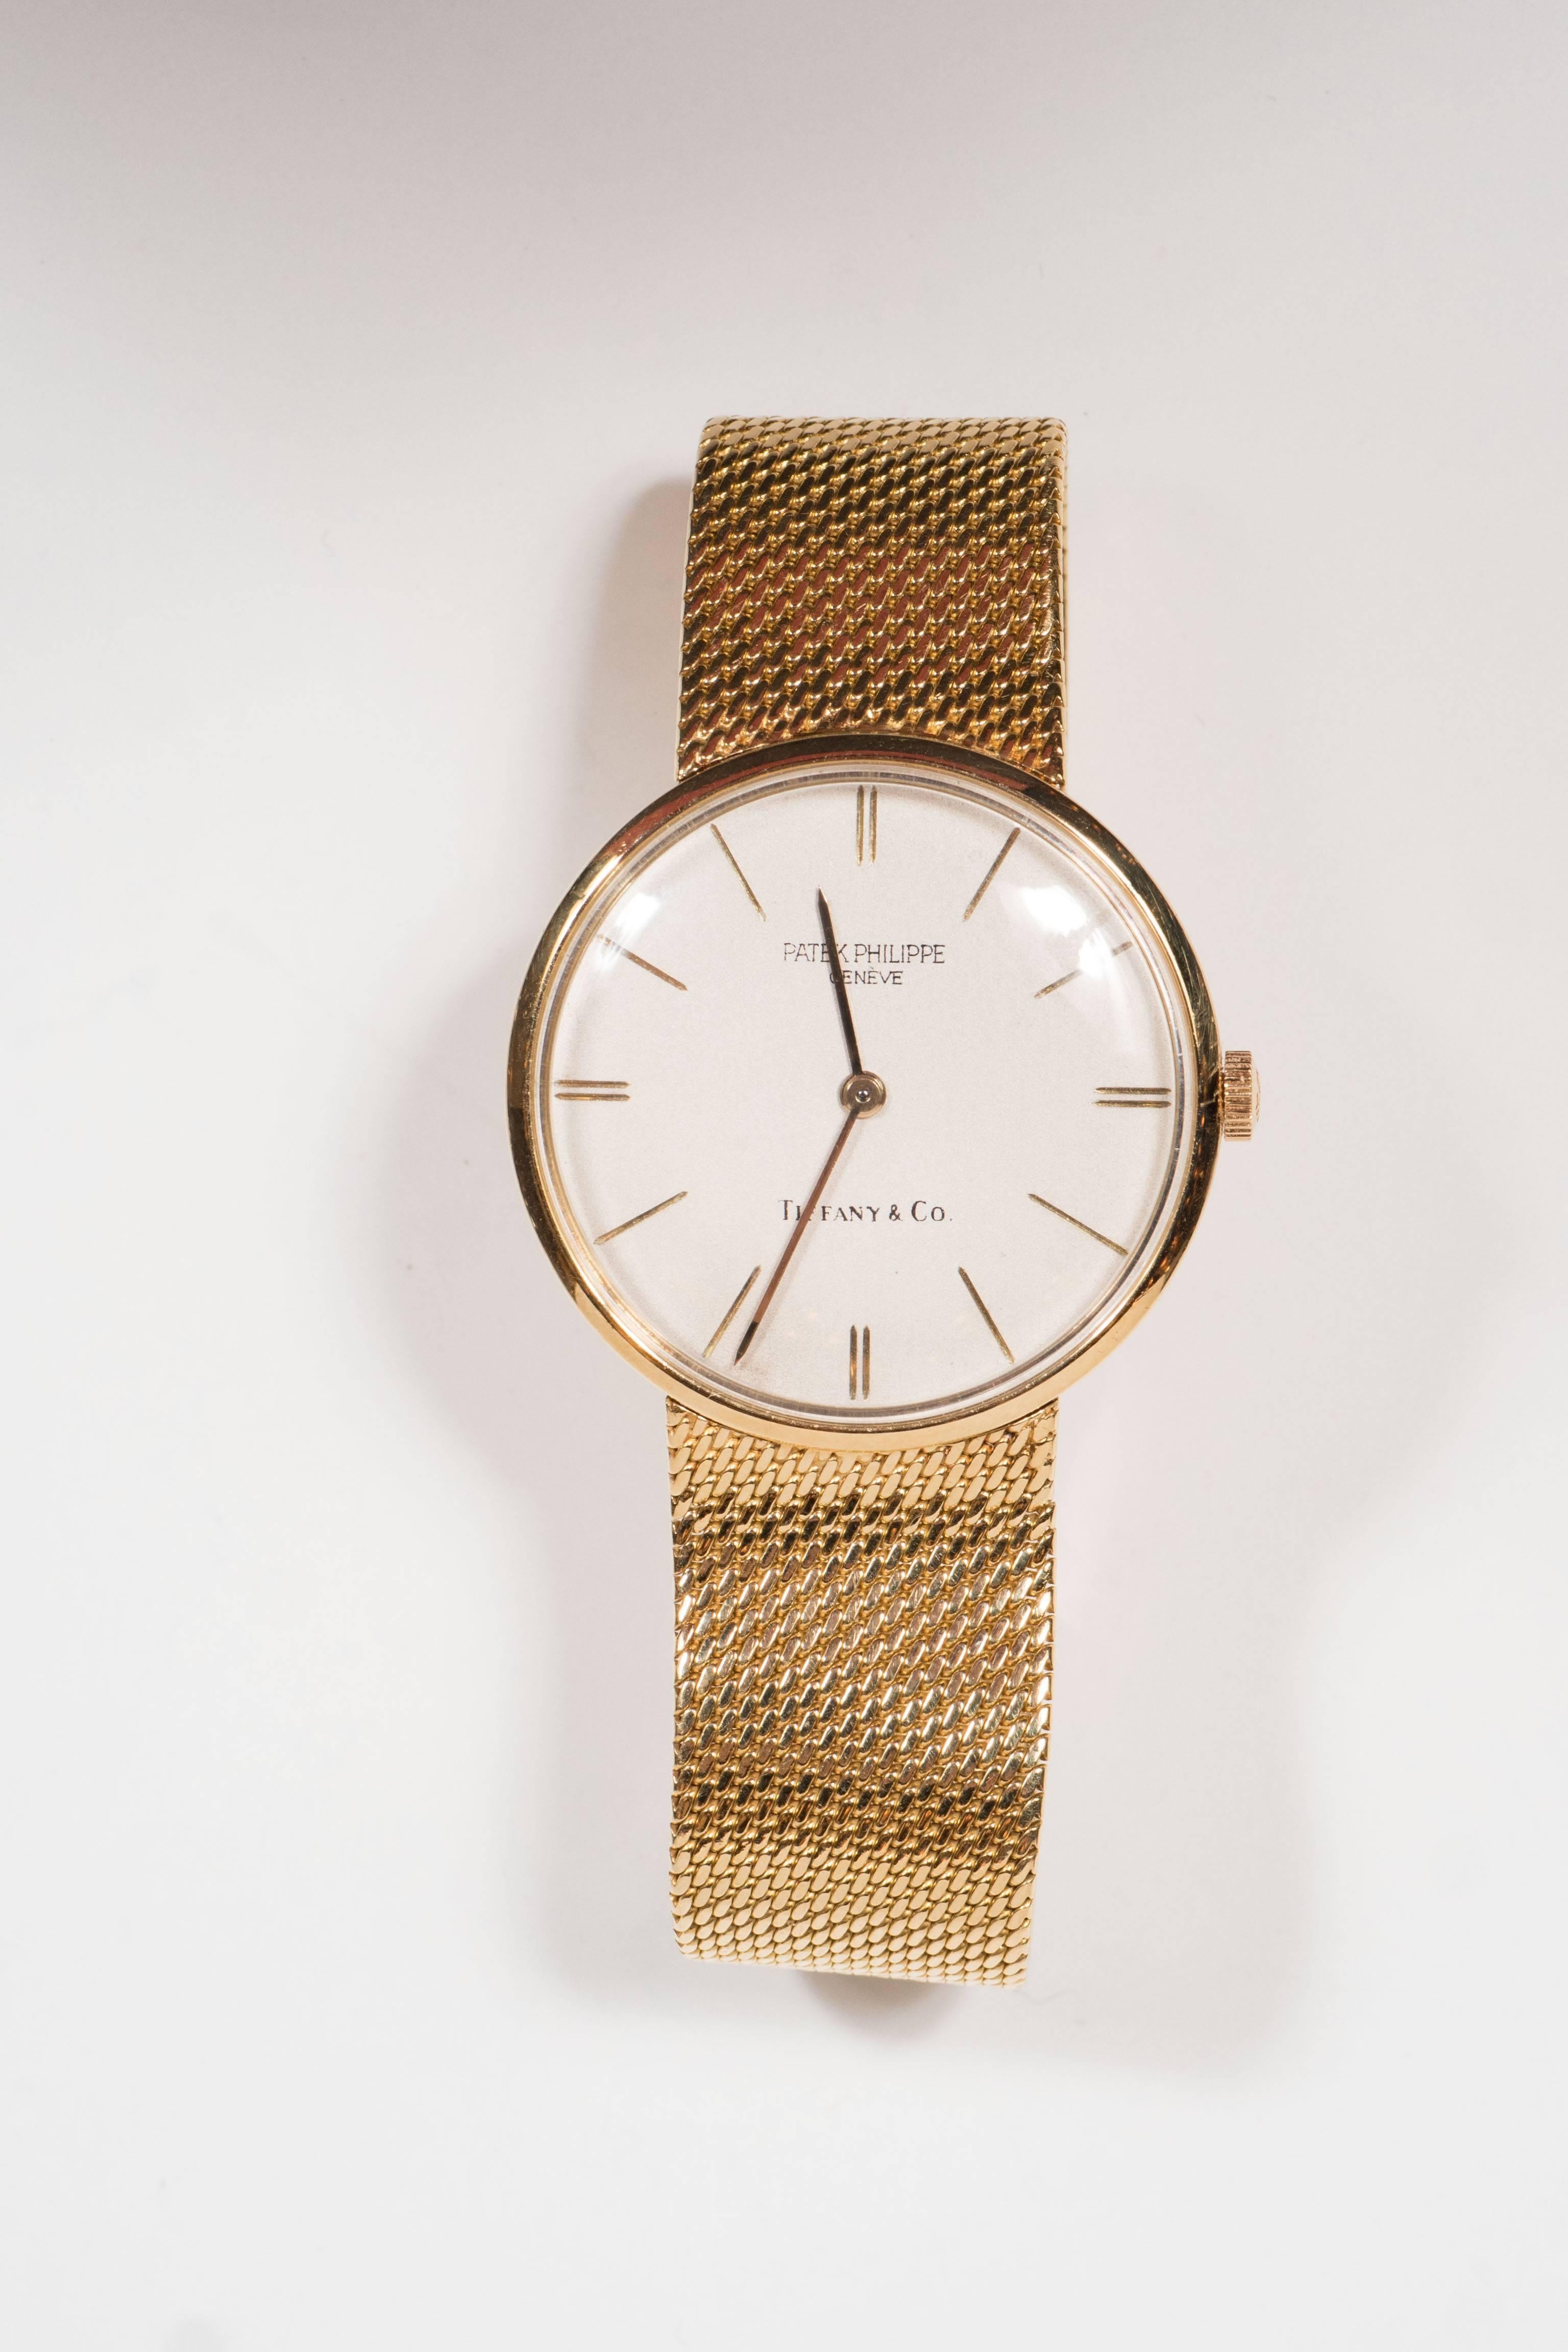 This Mid-Century modernist wristwatch is manual movement by Patek Phillipe, with a case diameter  of 32mm, dial and clasp signed Patek Phillipe and dial additionally signed Tiffany & Co. It can be worn unisex. The bracelet is a gold mesh and it fits